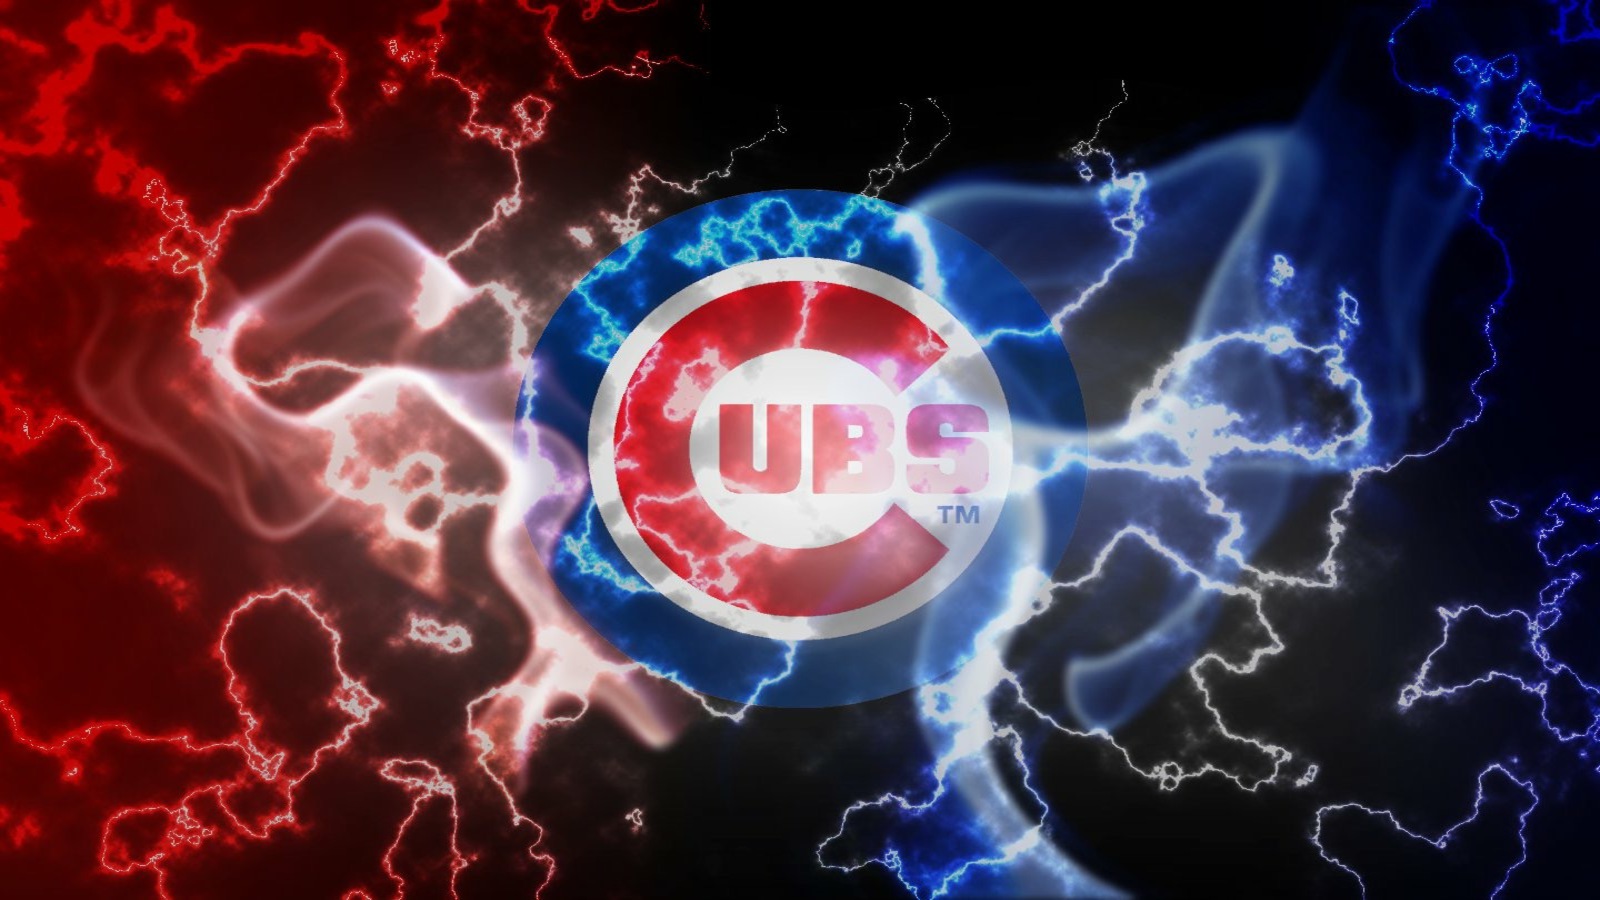 Chicago Cubs Wallpapers Full HD Pictures